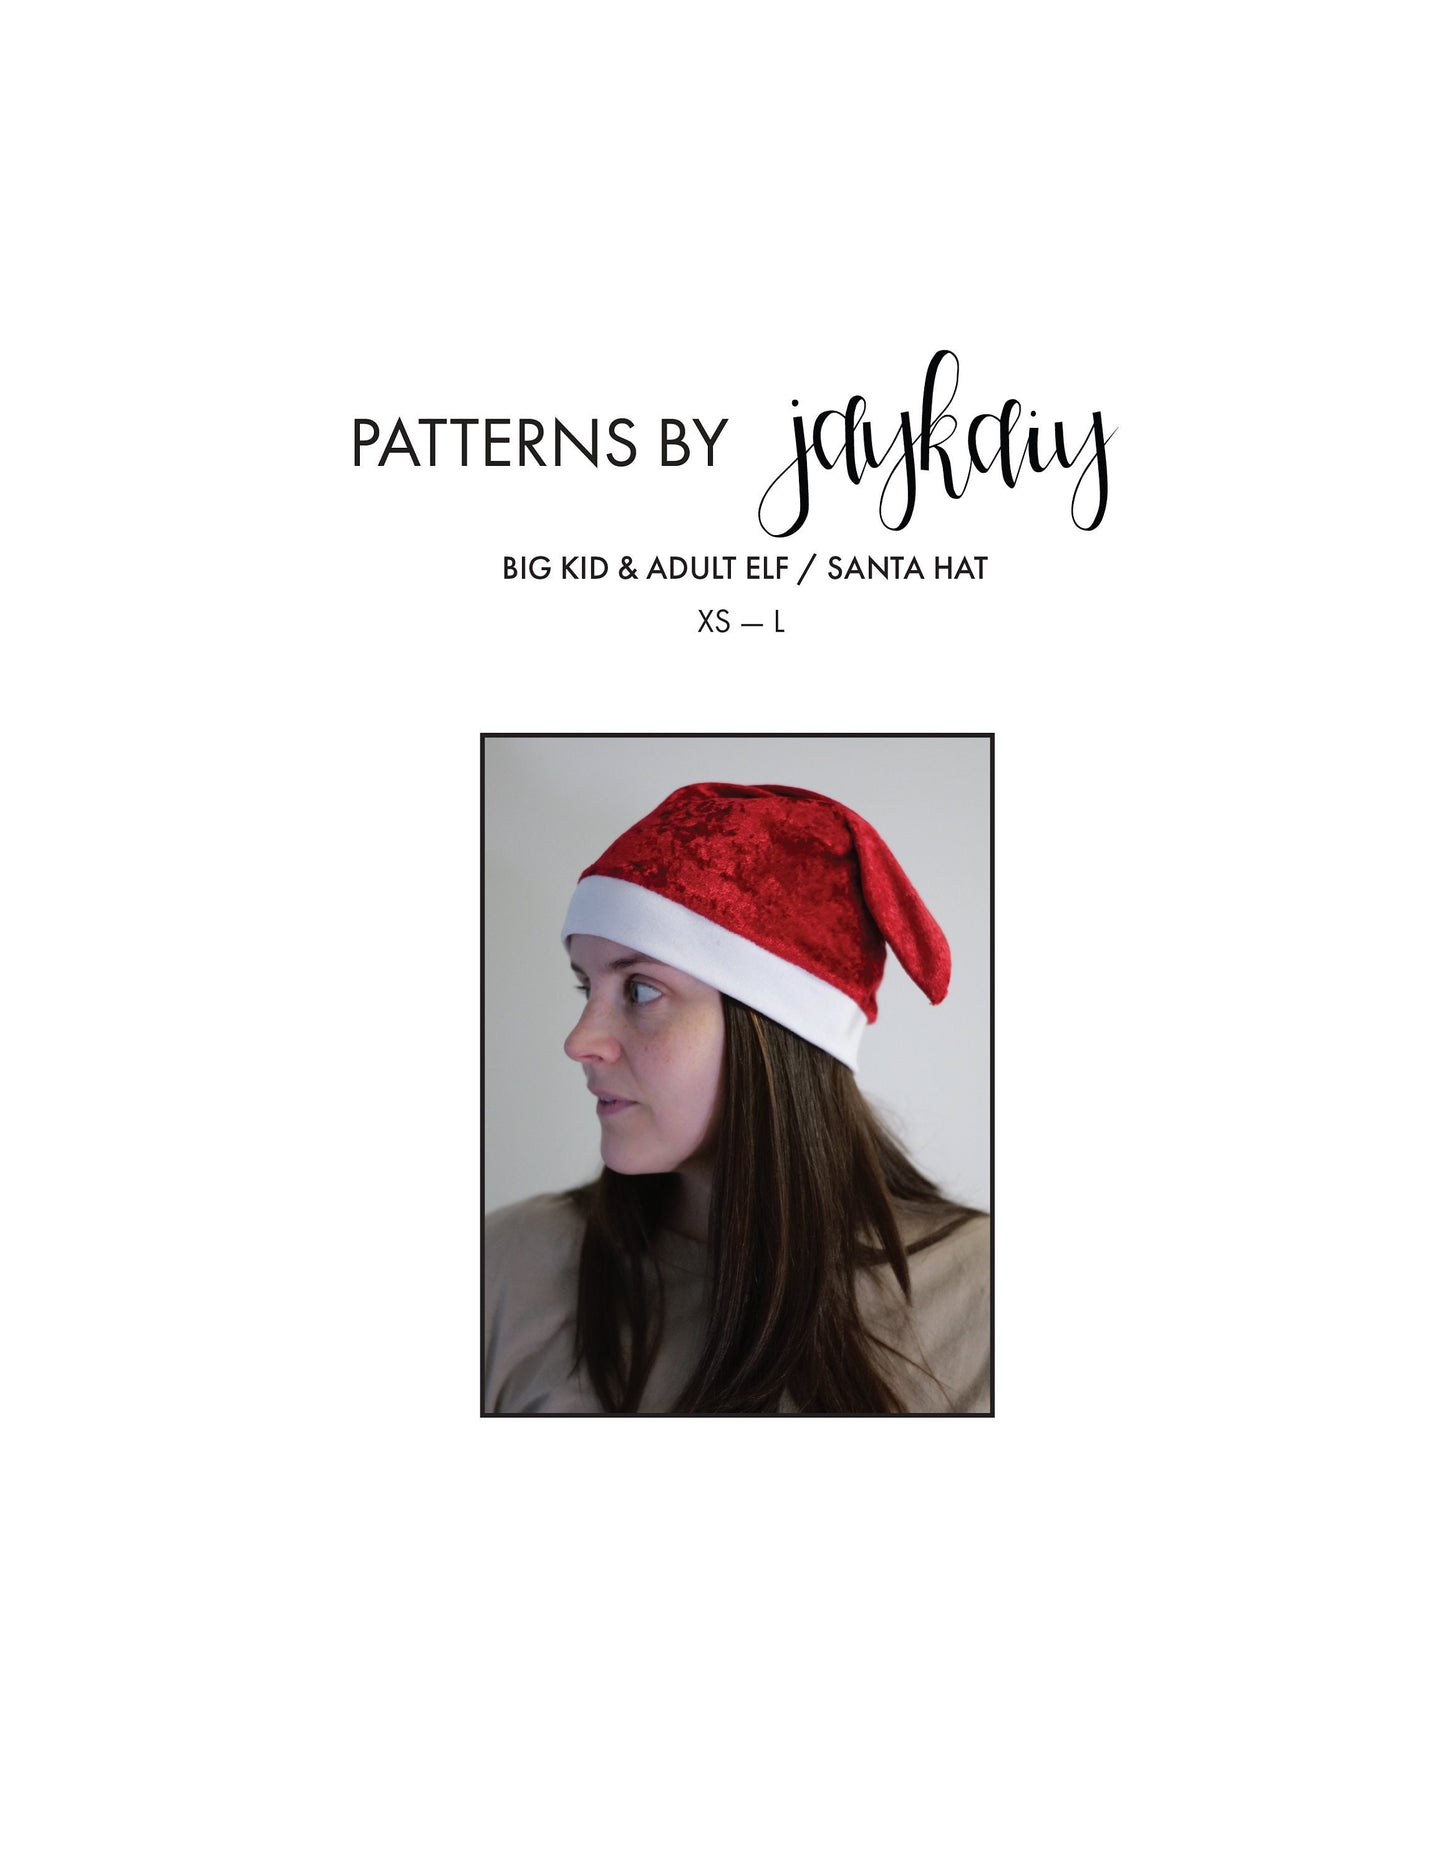 Adult & Big Kid (5yr+) Santa/Elf Hat sewing pattern with picture Tutorial — Sizes XS (5 Yr+) to L